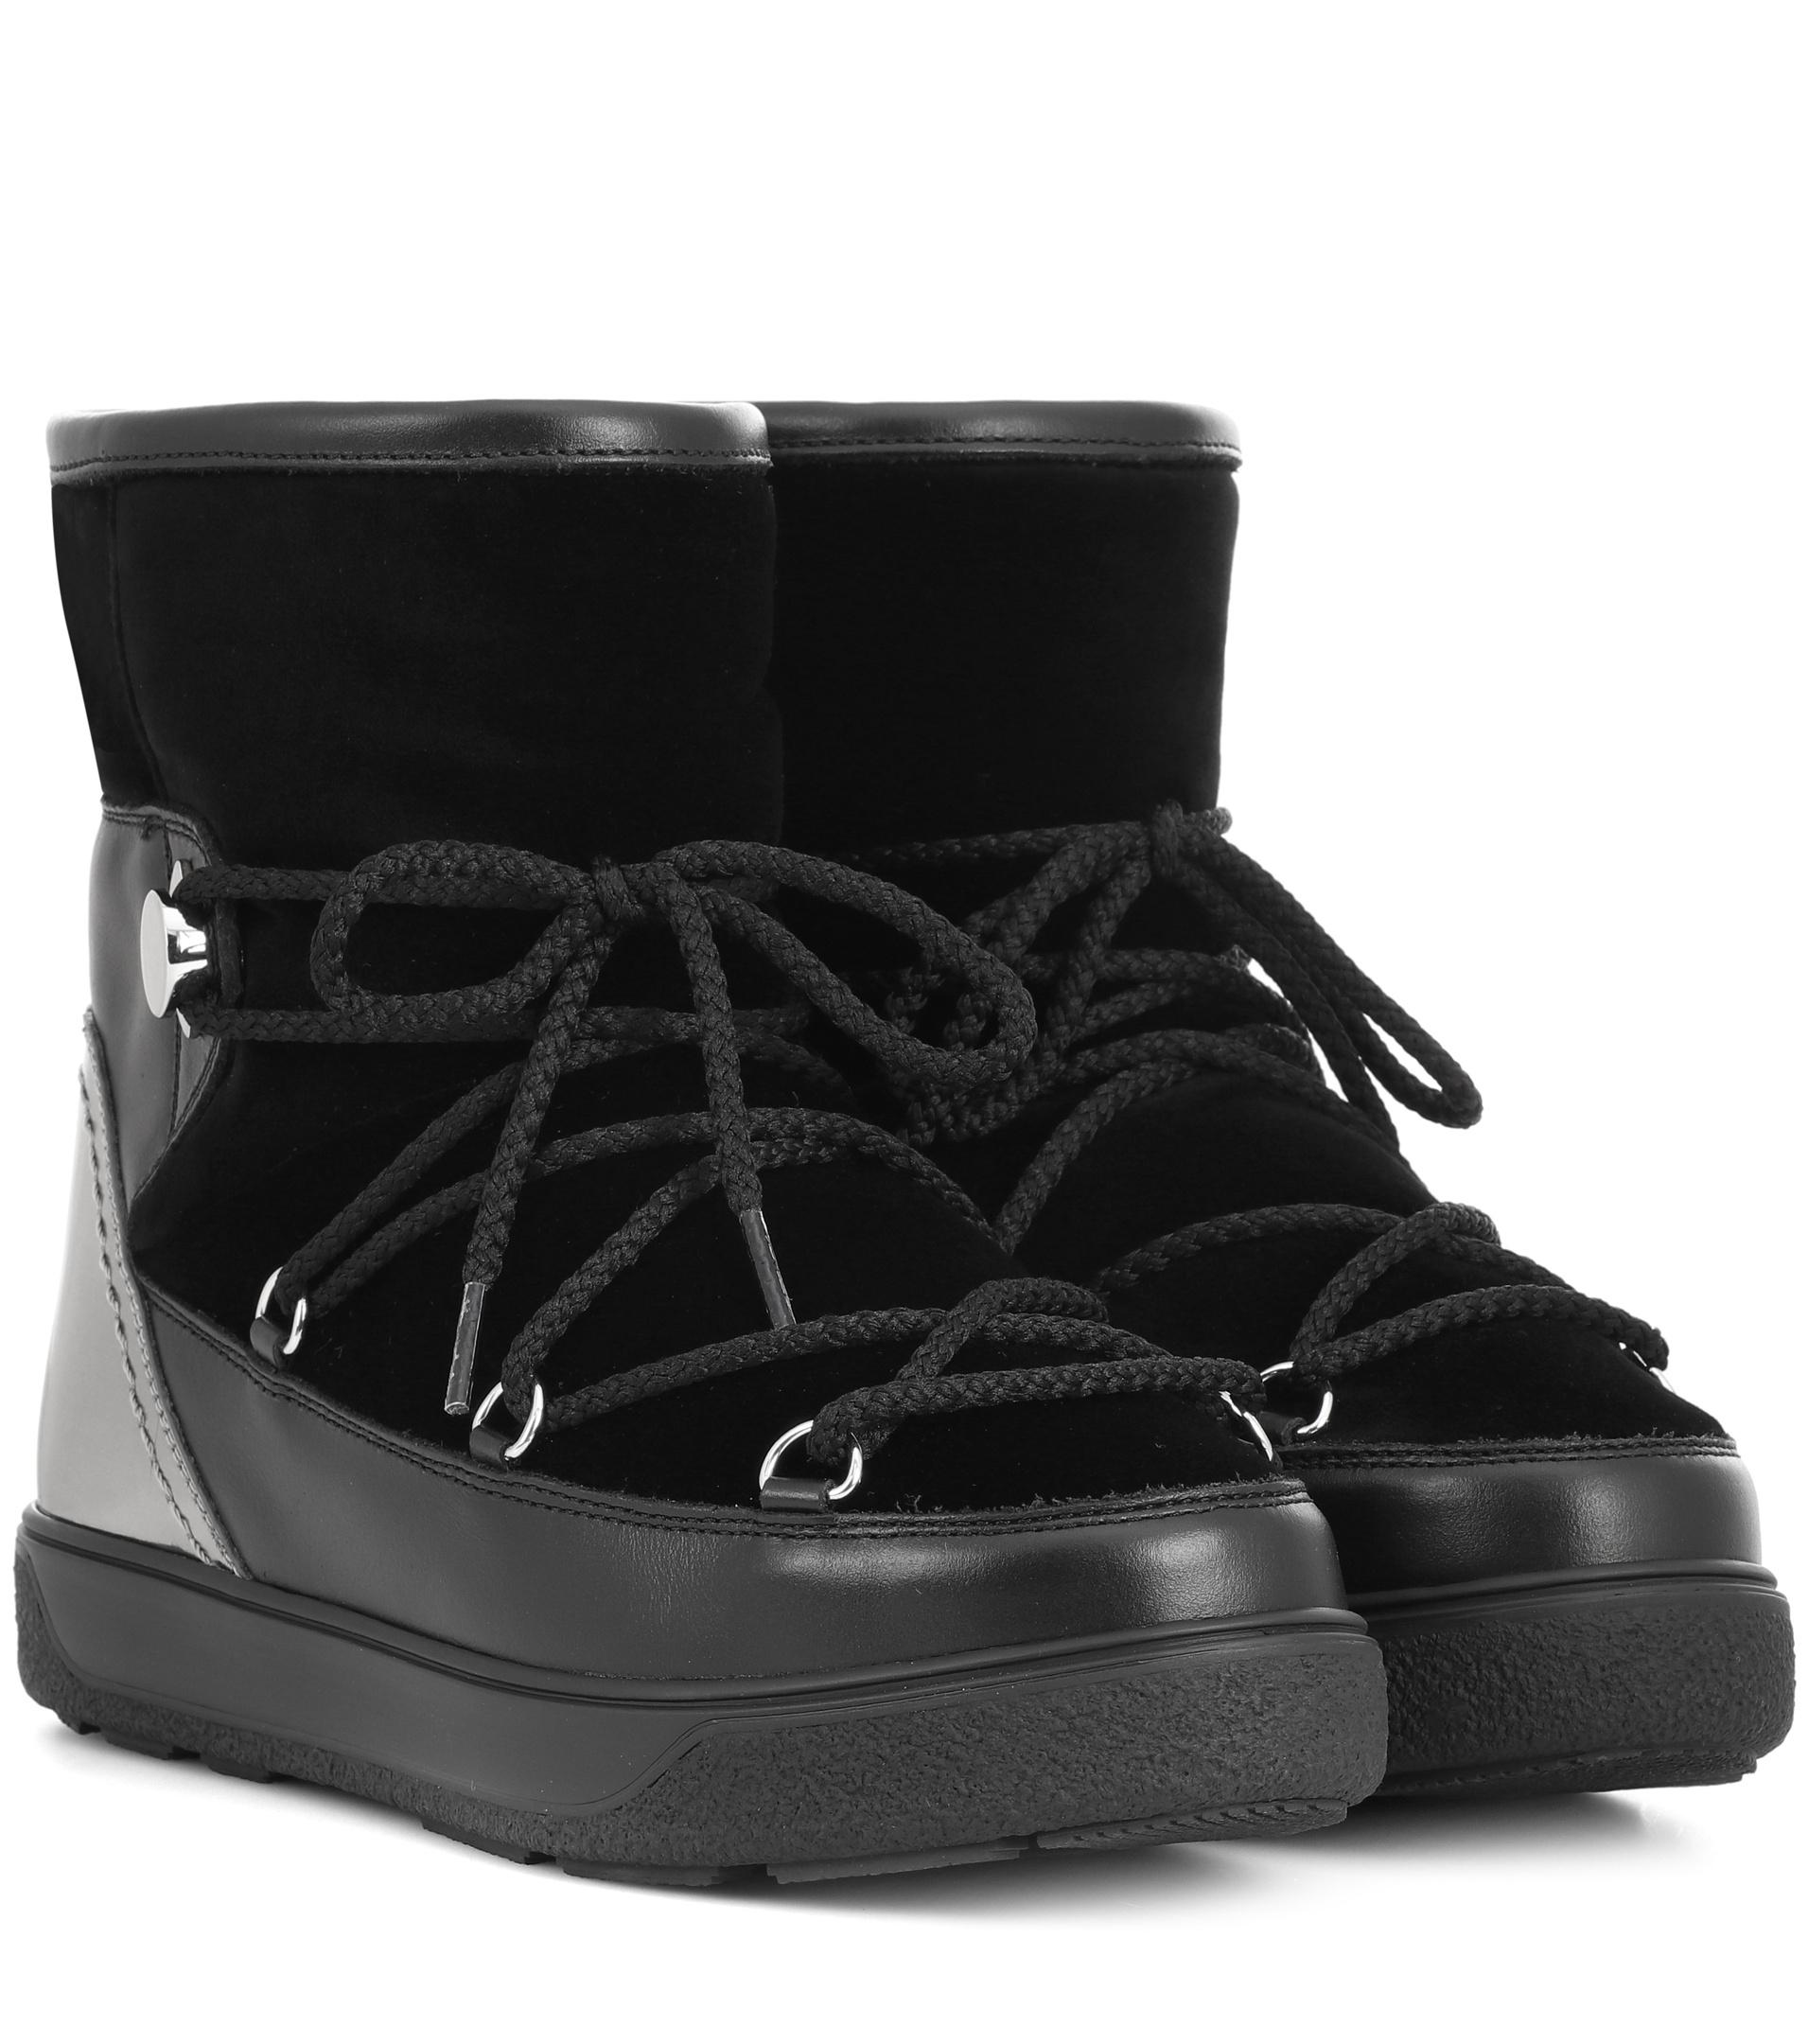 Moncler Snow Boots in Black - Save 39% - Lyst